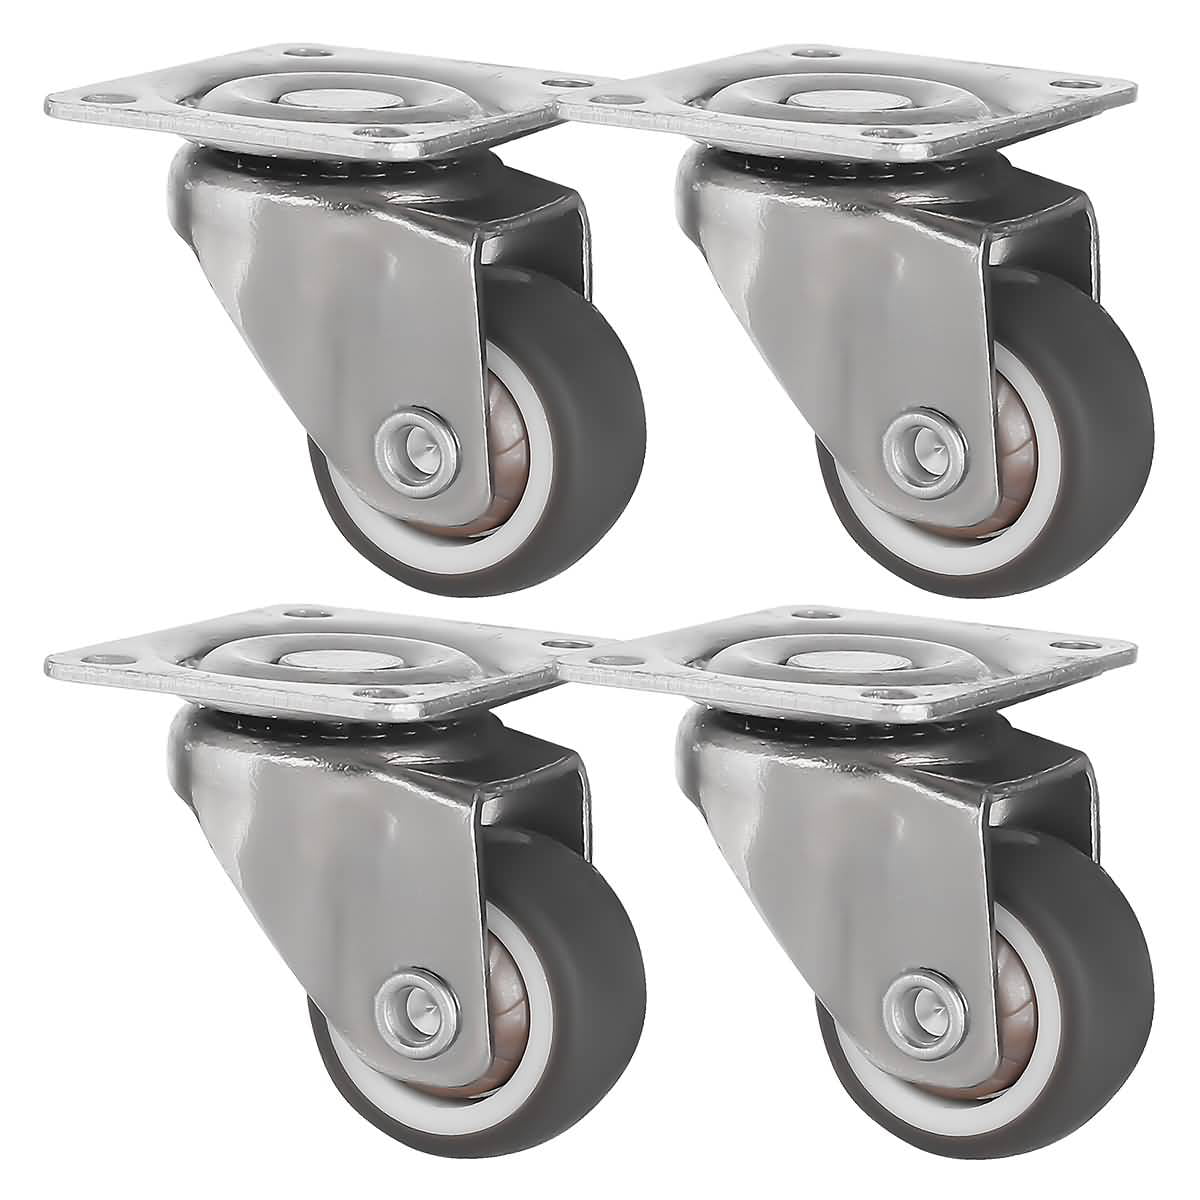 Details about   8 Pack 1-inch Low Profile Caster Wheels Soft Rubber Swivel Small & Silent 360 